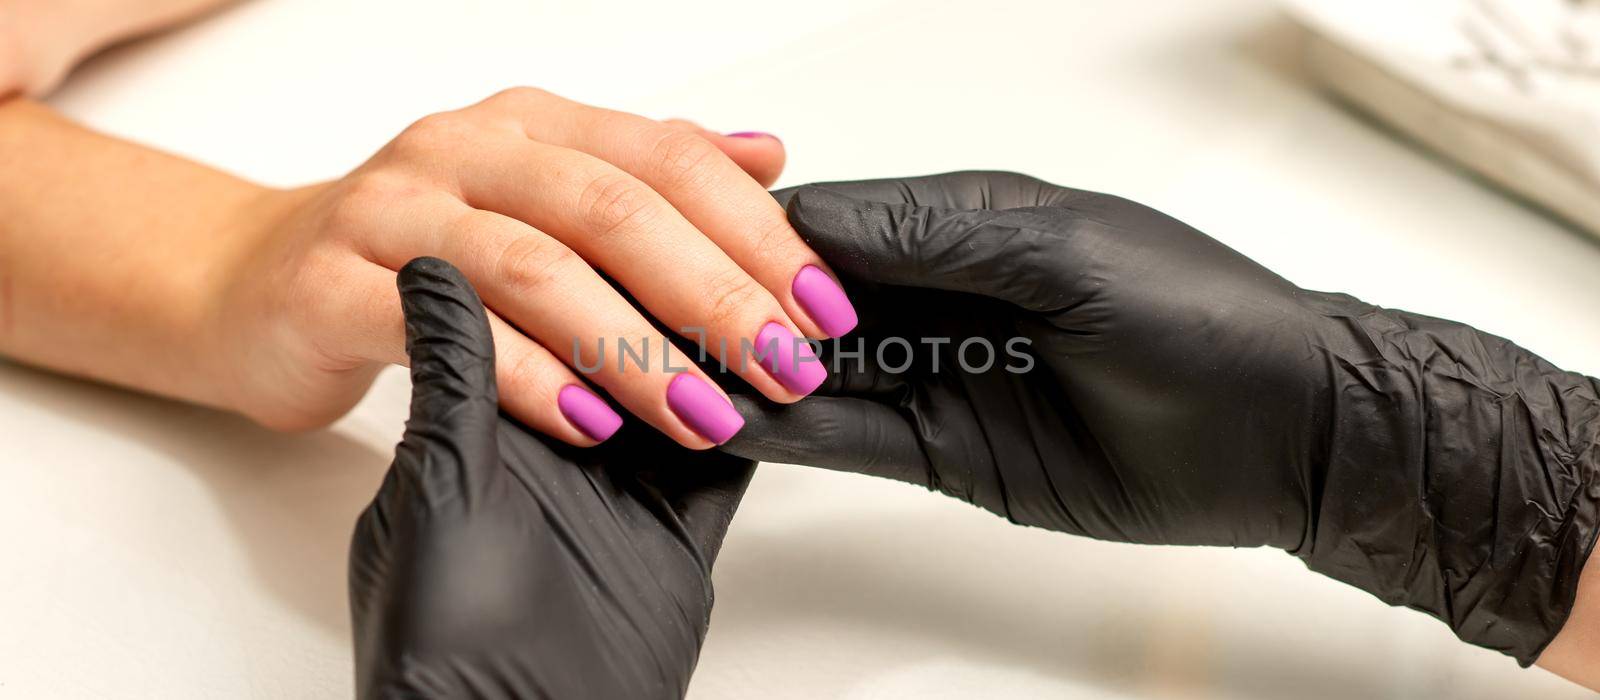 A manicurist holds beautiful young female hands showing finished purple, pink polish manicure in a nail salon